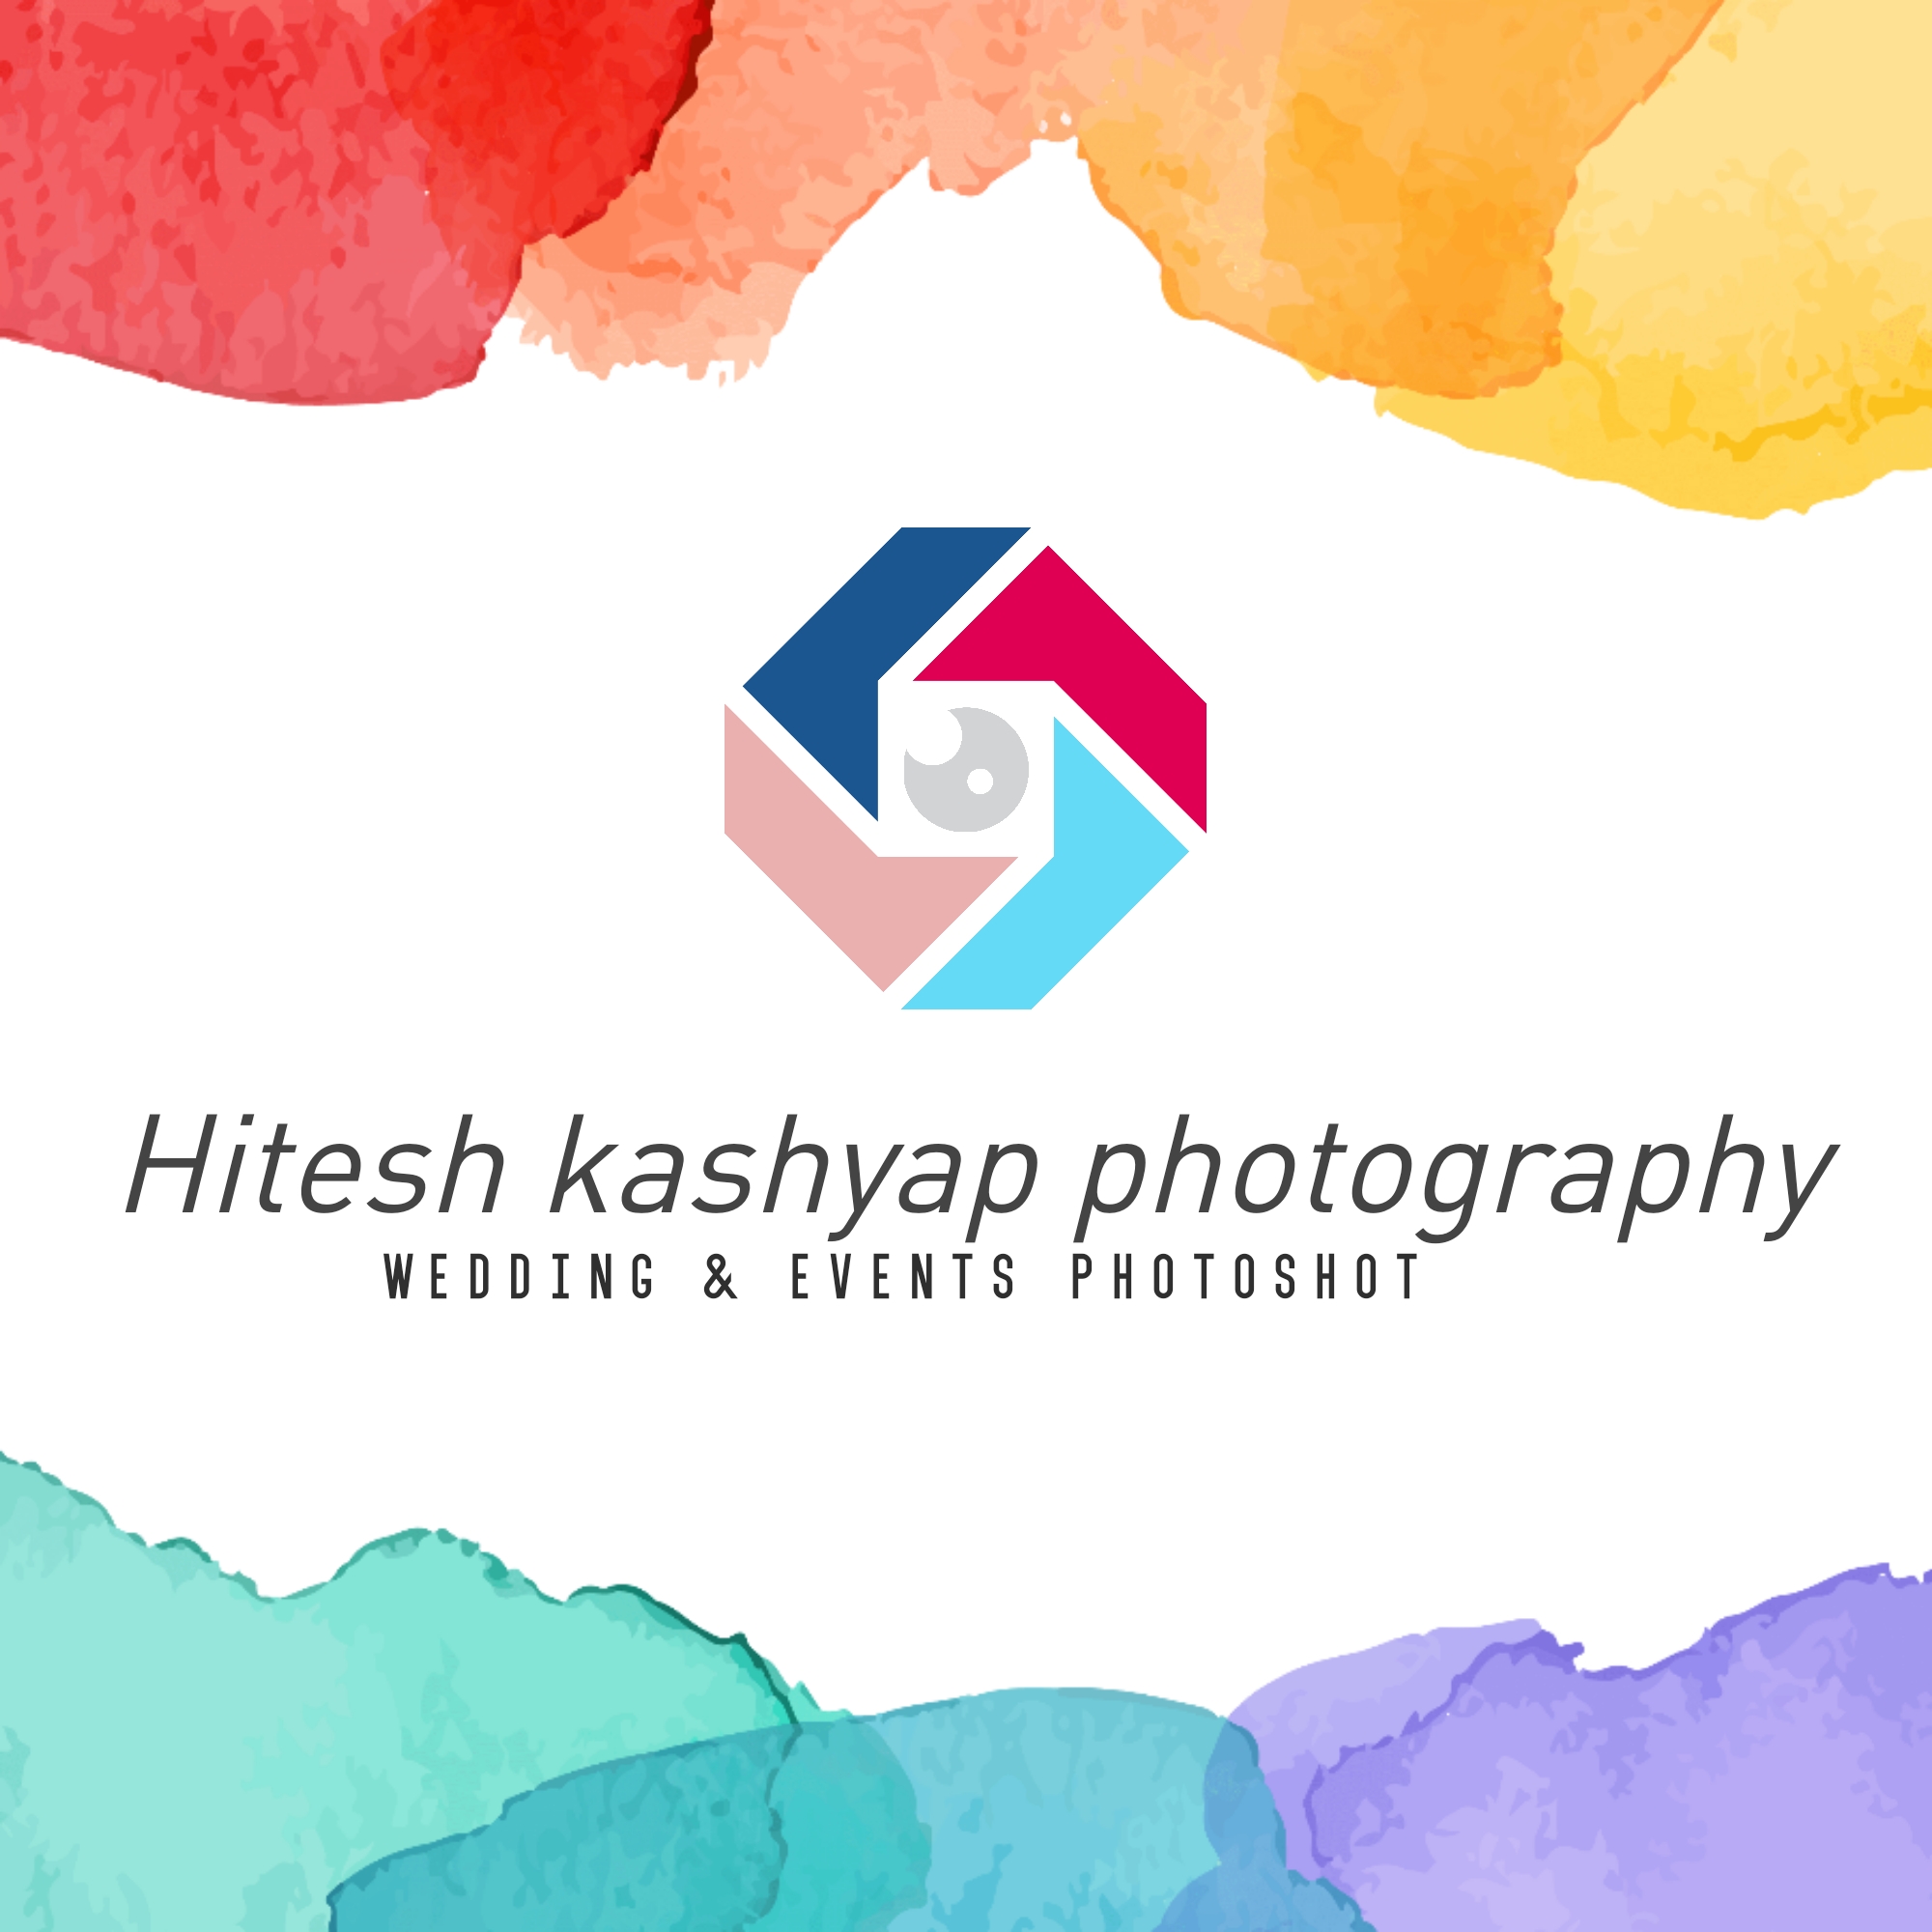 Hitesh kashyap photography|Catering Services|Event Services